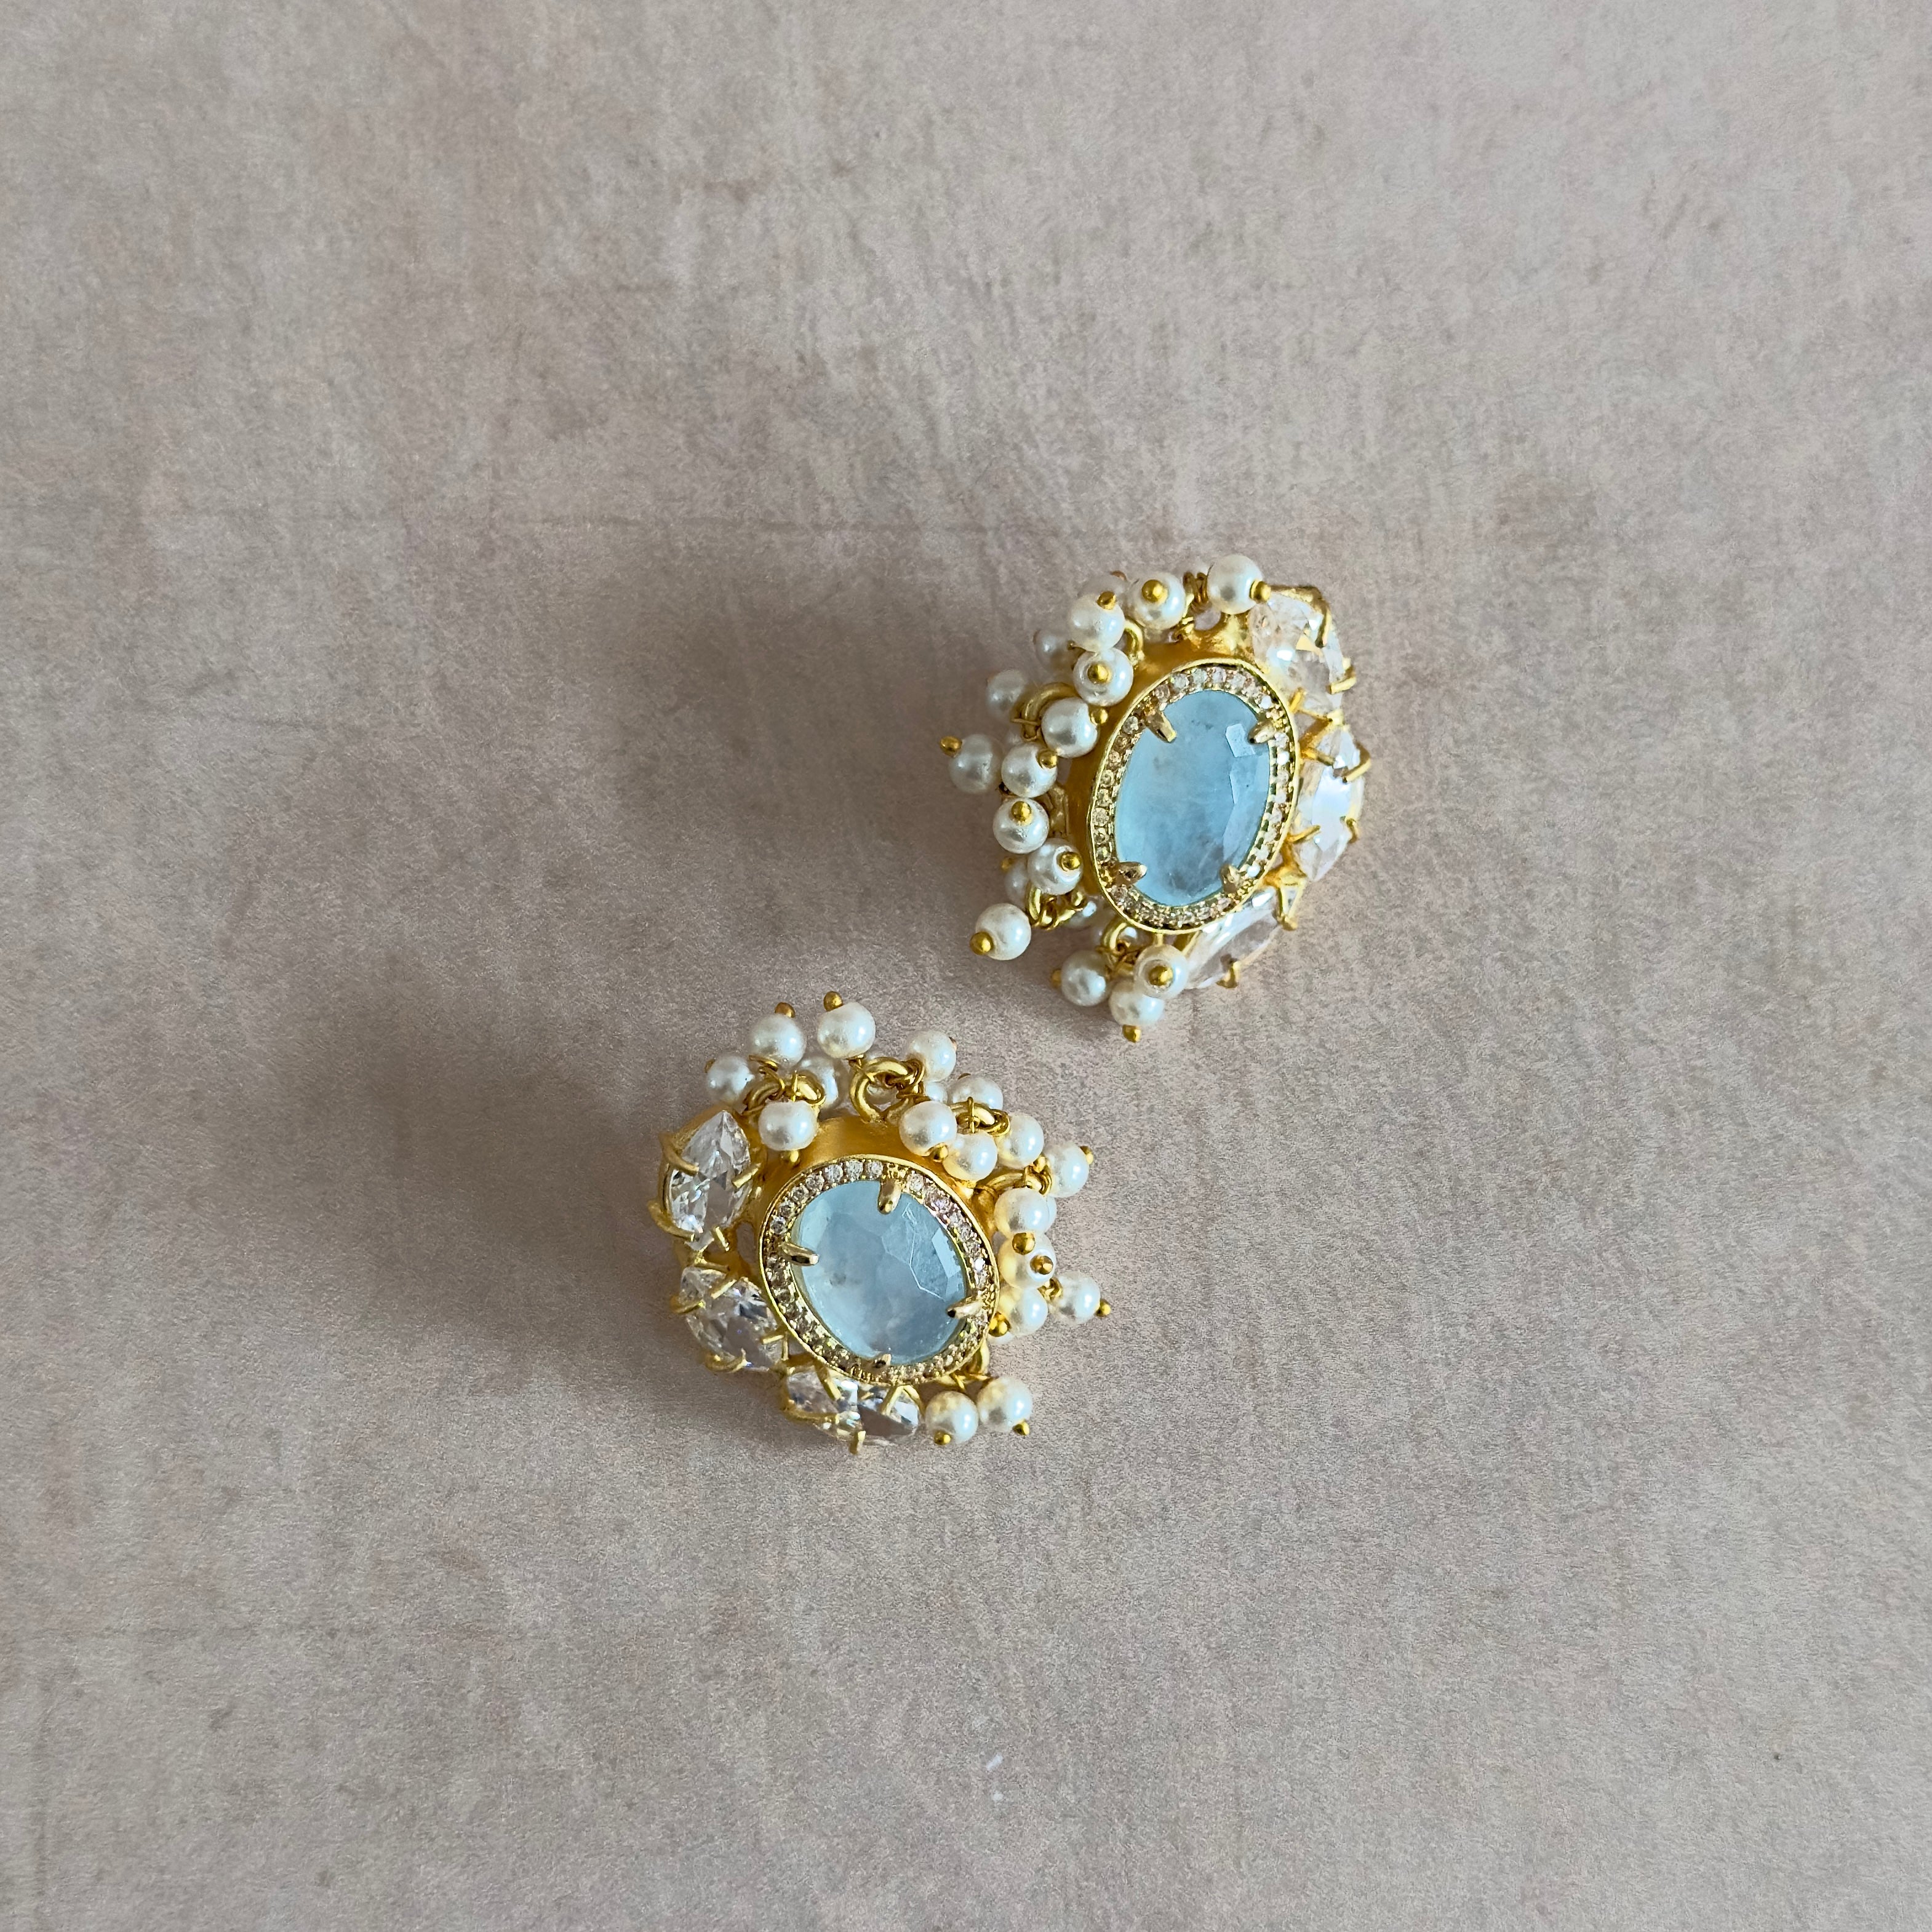 Sparkle and shine with our Blue Crystal Stud Earrings! The stunning blue crystal center is surrounded by sparkling cubic zirconia for an eye-catching look. Elevate any outfit with these elegant earrings that are perfect for any occasion.